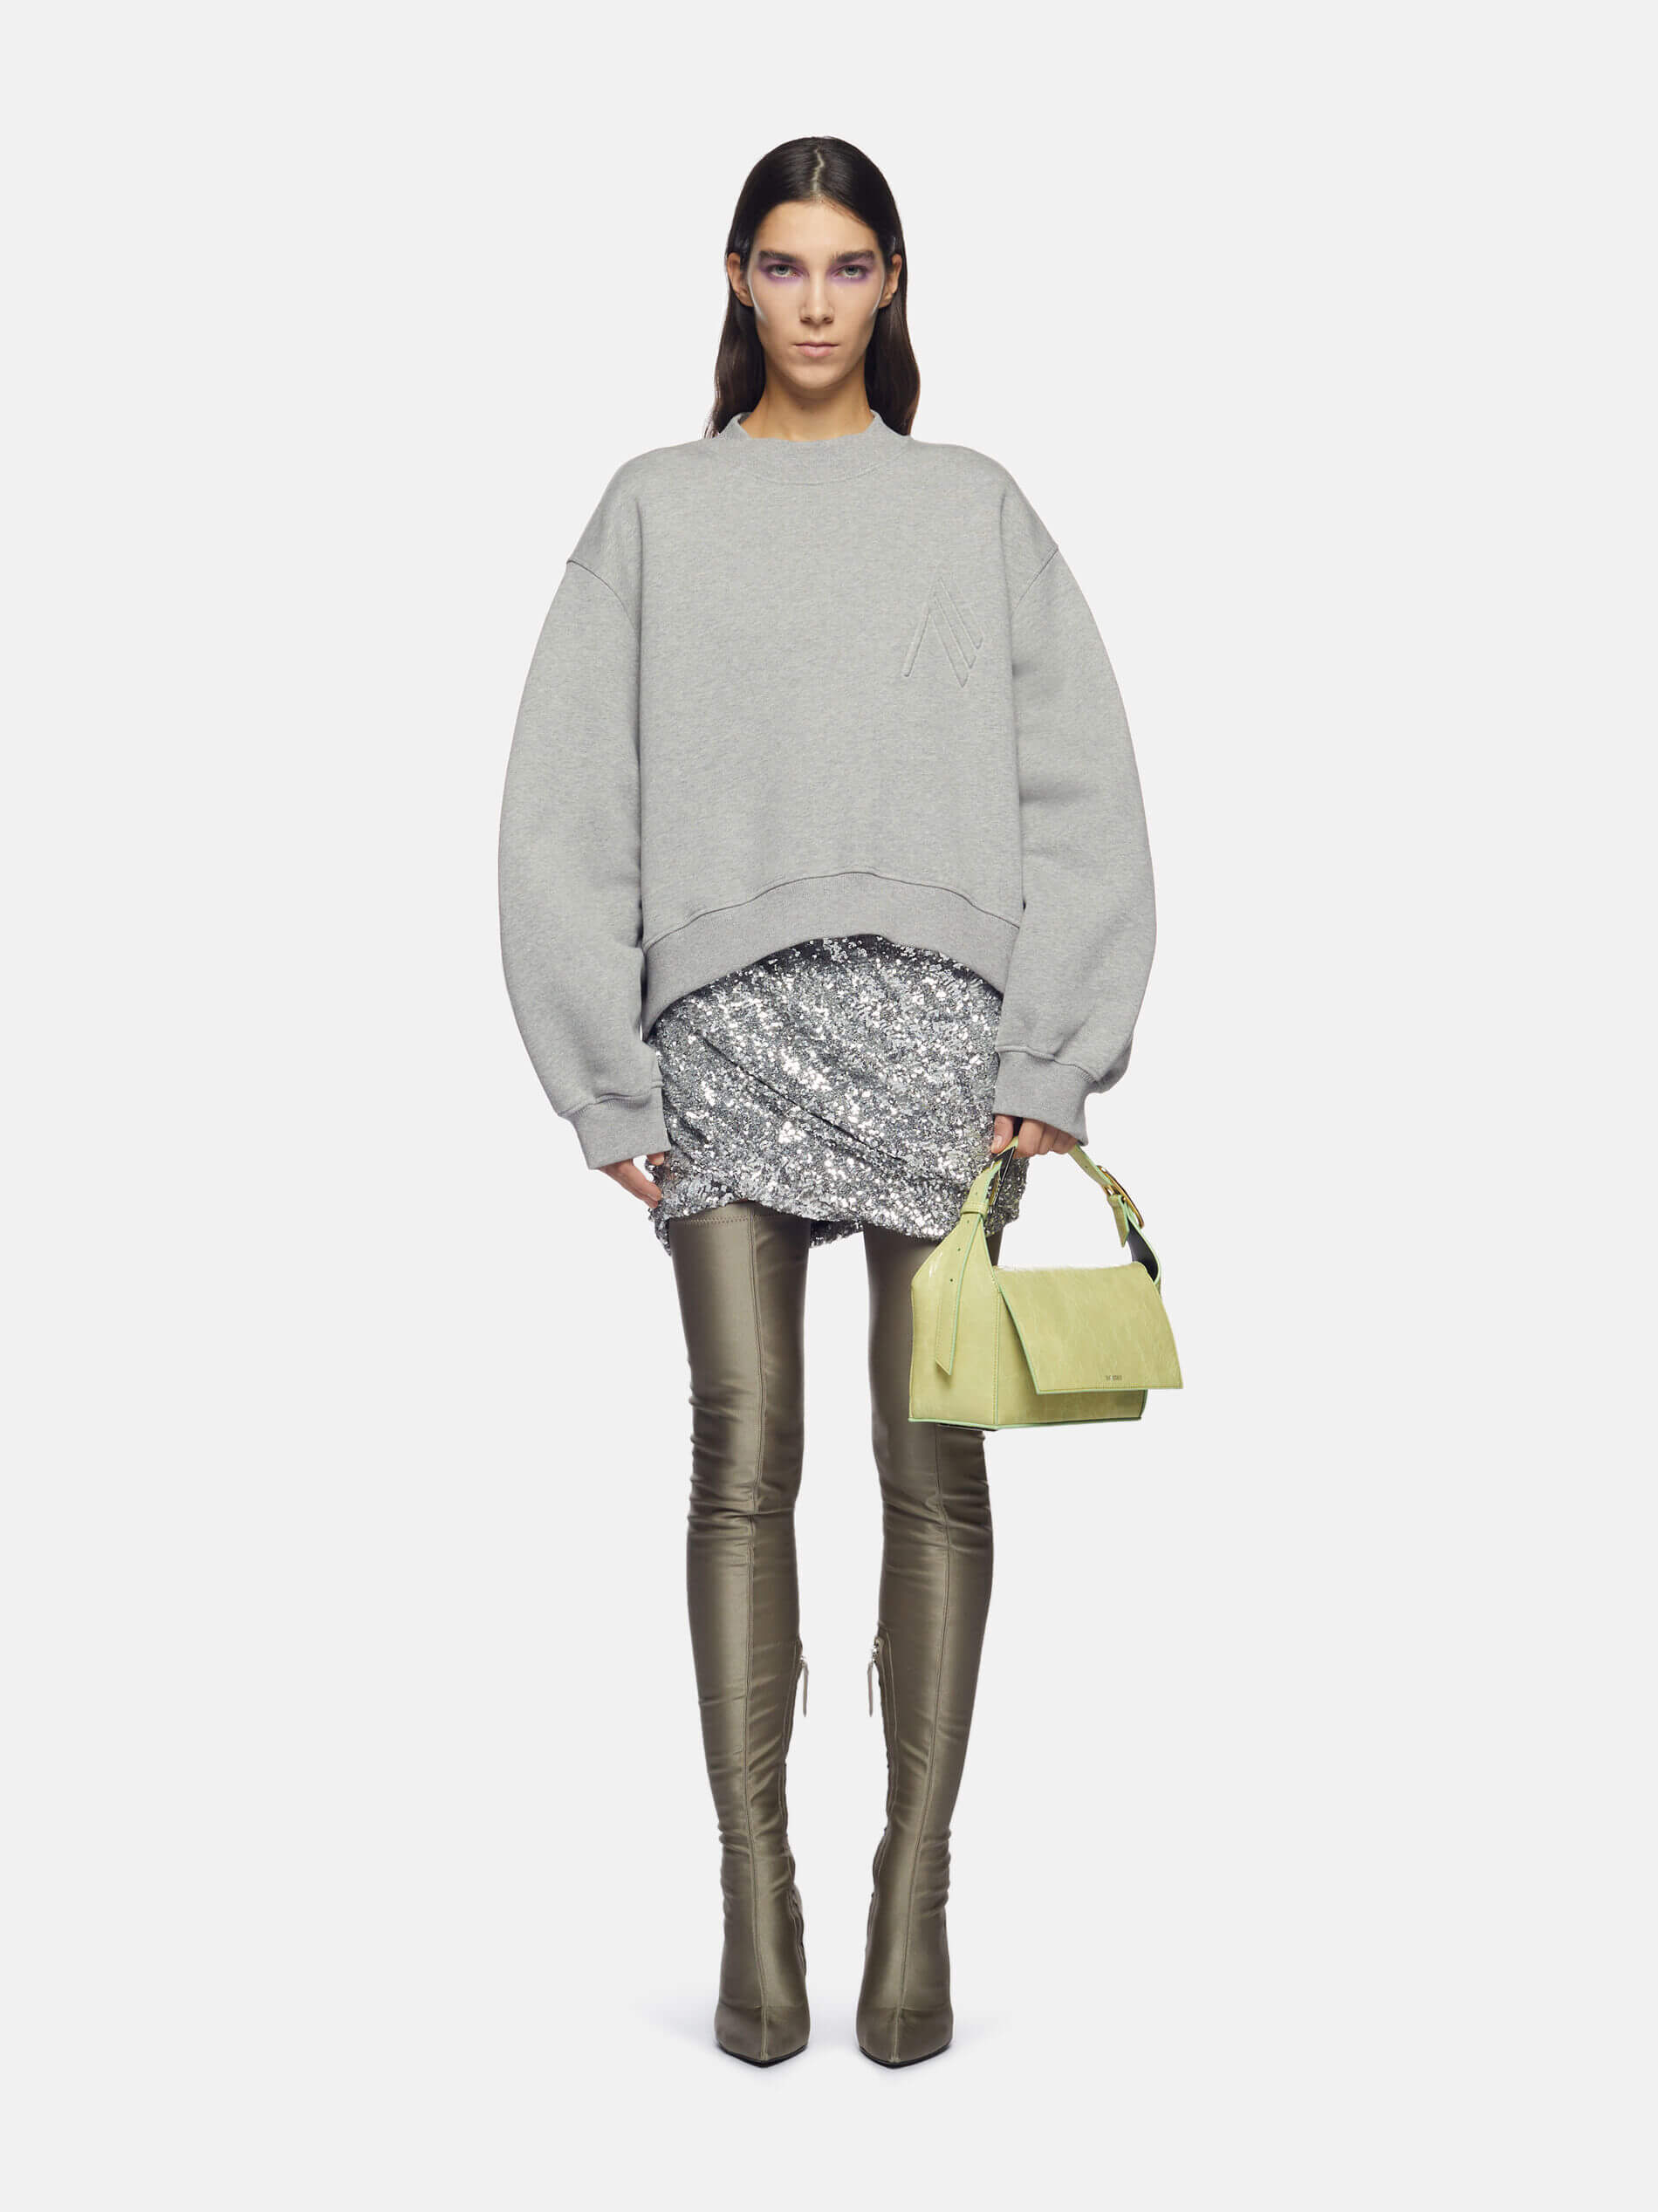 The Attico Sweatshirt in Melange Grey available at TNT The New Trend Australia.